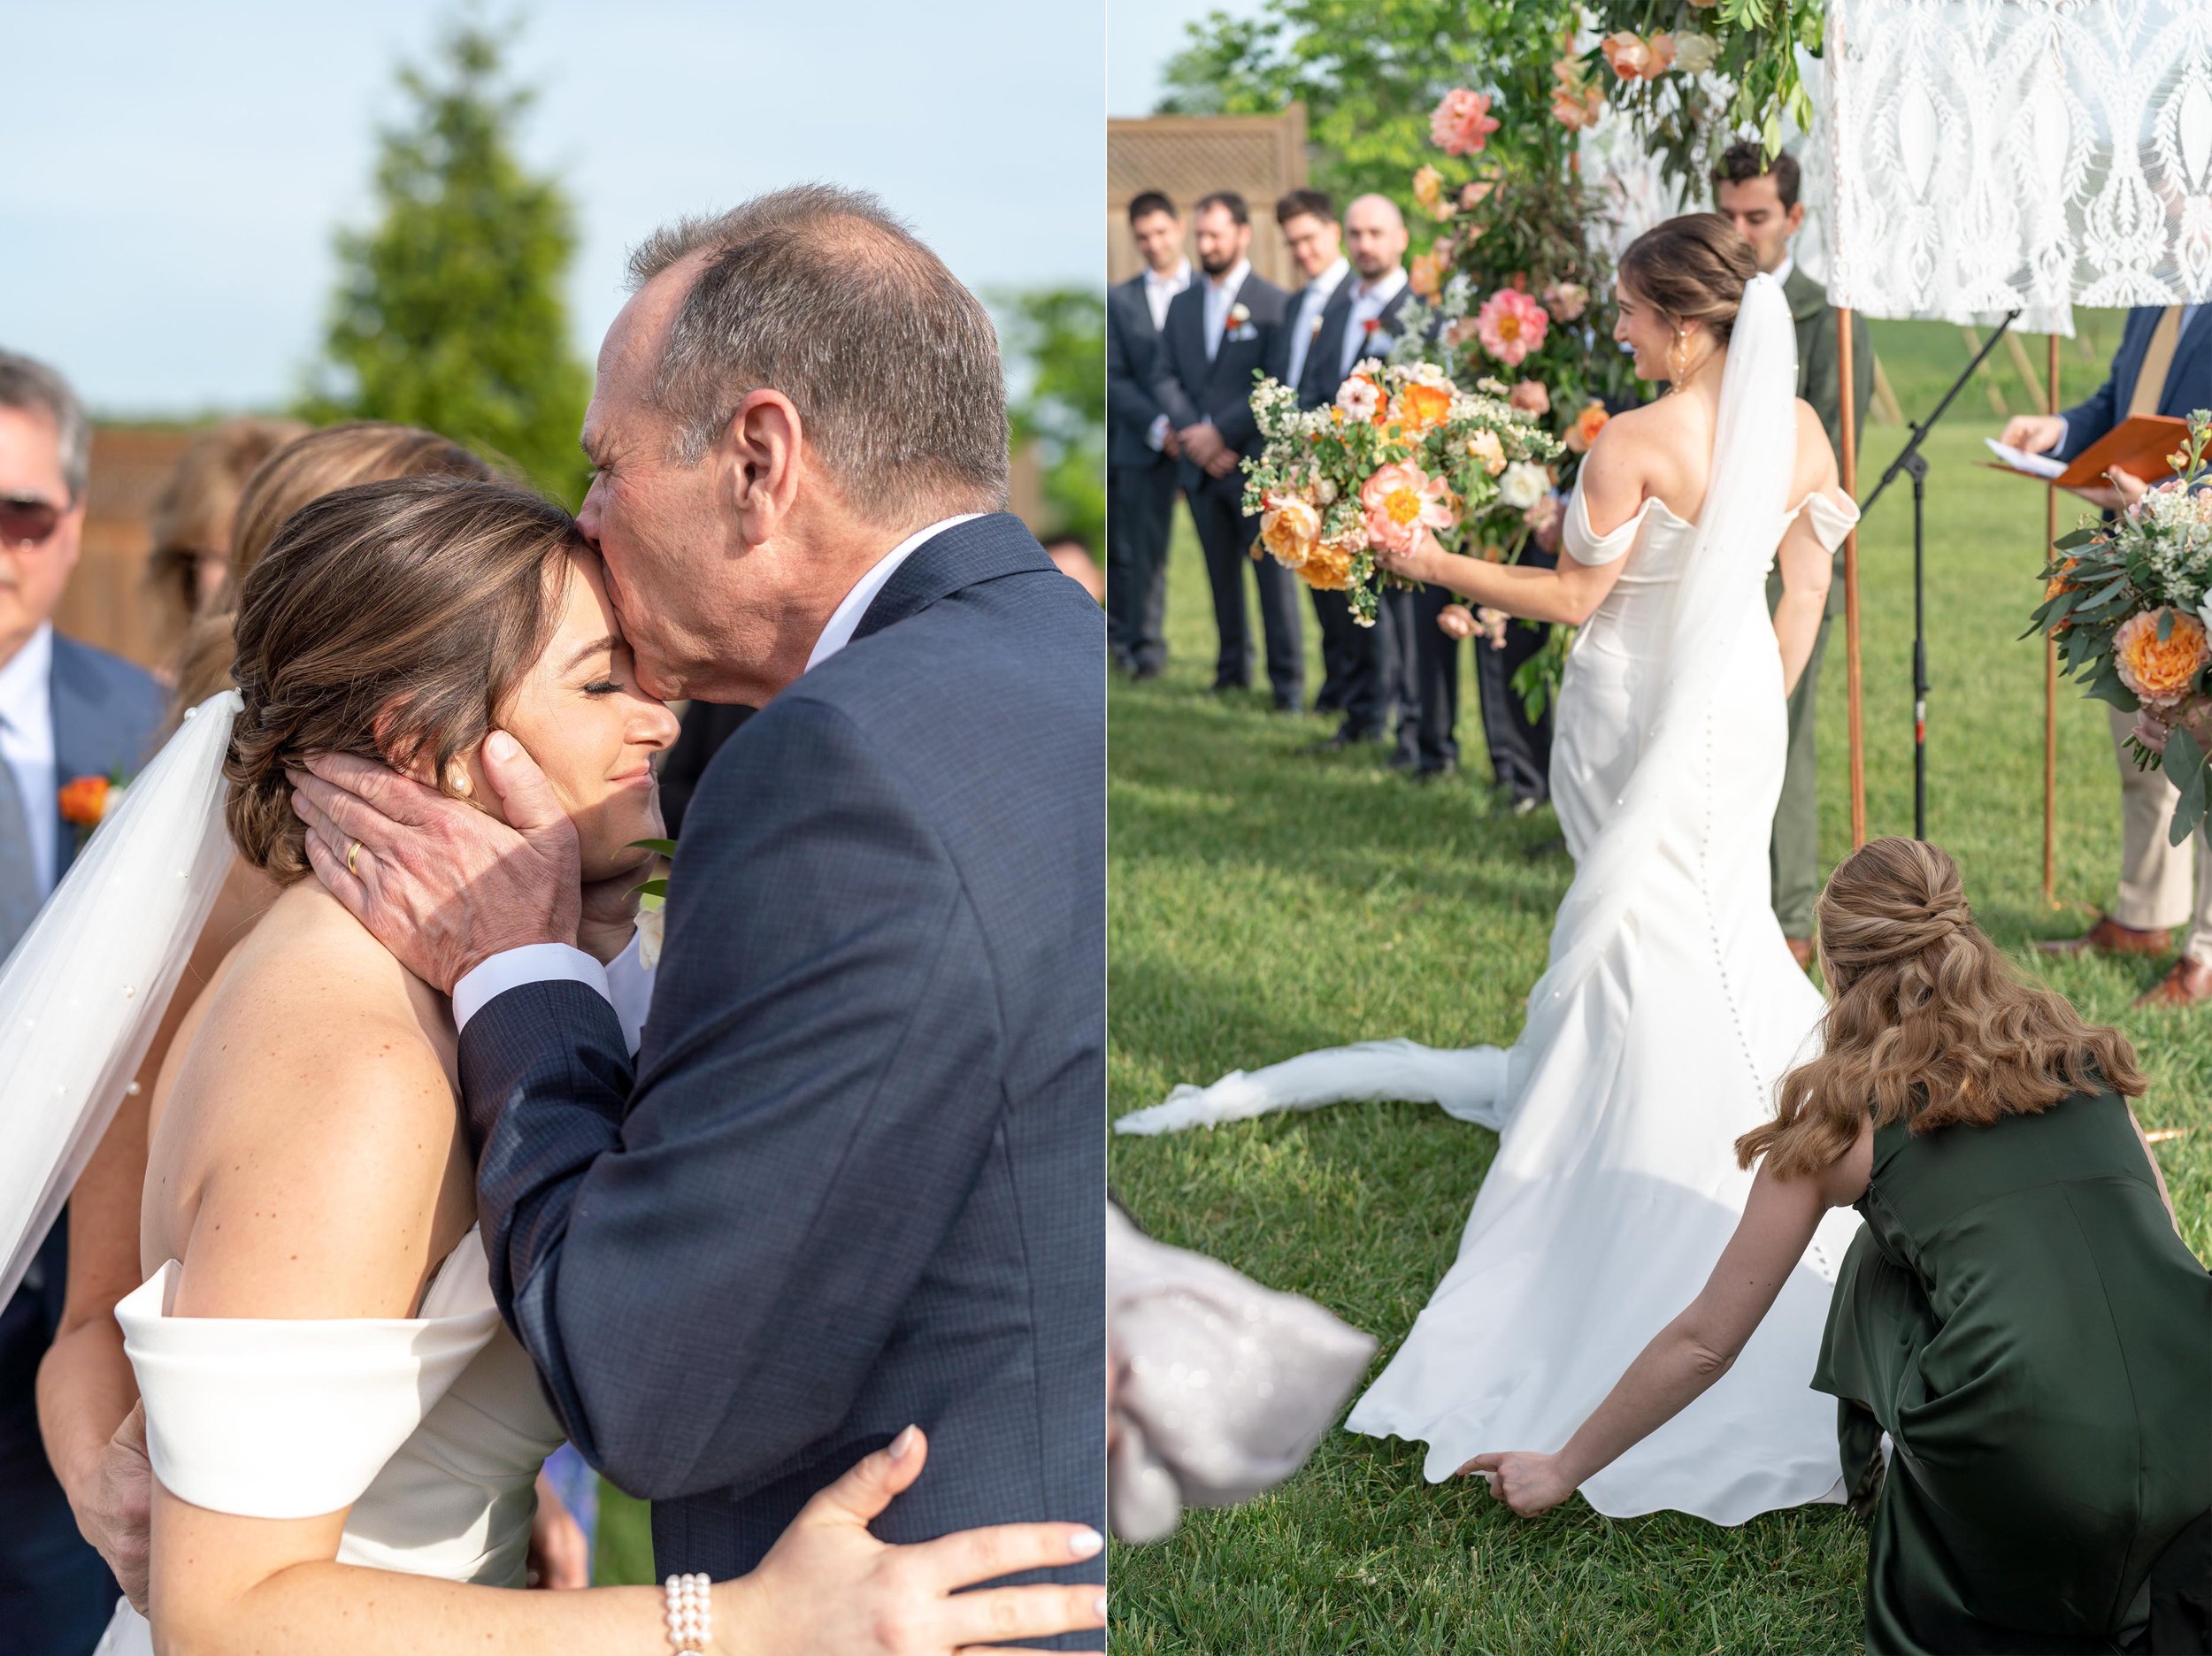 Bride's father kisses her on the forehead and sister fixes her train